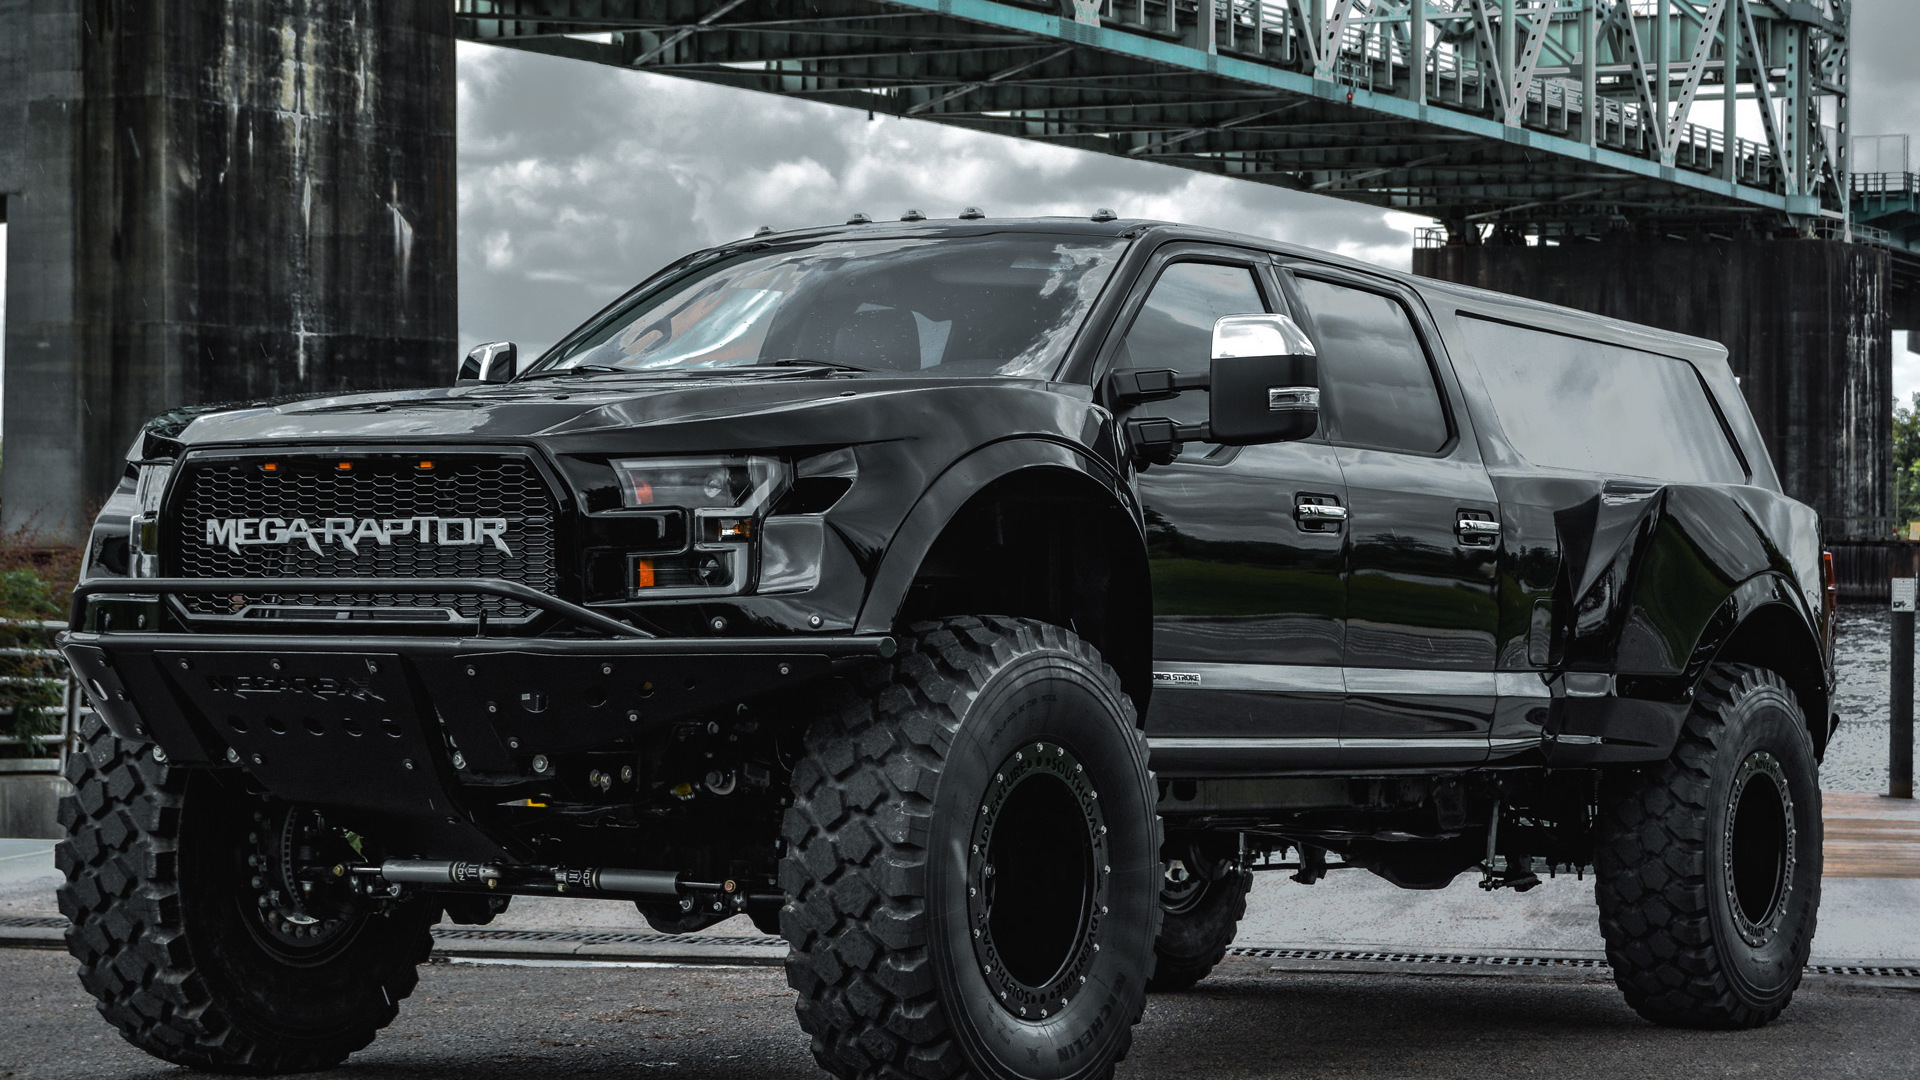 MegaRexx SVN based on the 2022 Ford F-250 Super Duty